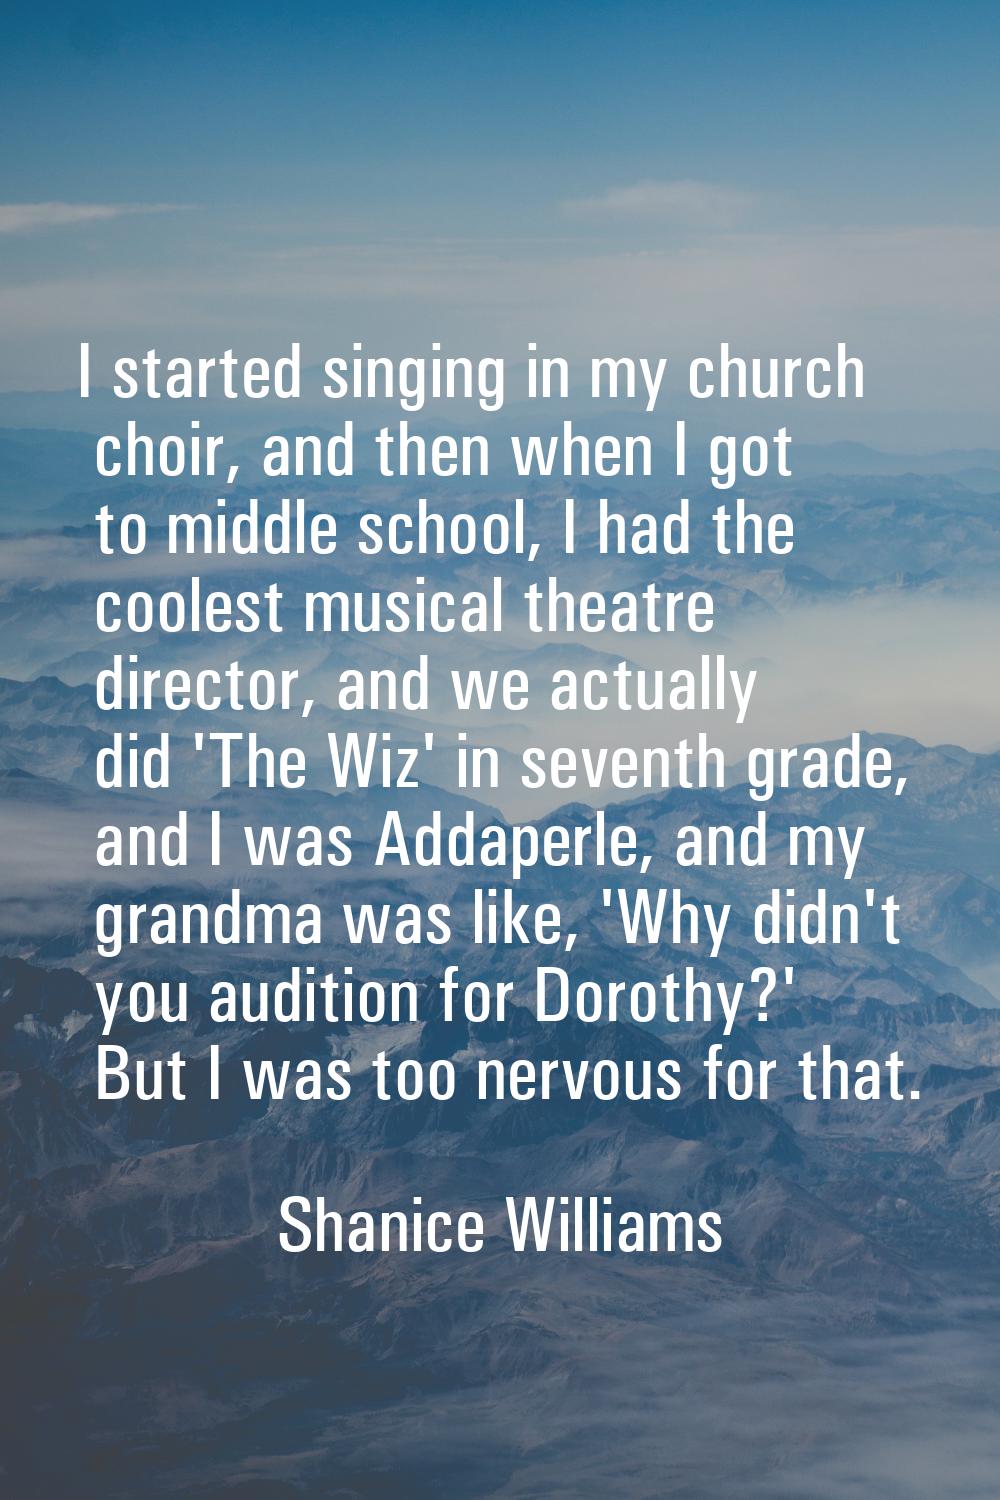 I started singing in my church choir, and then when I got to middle school, I had the coolest music